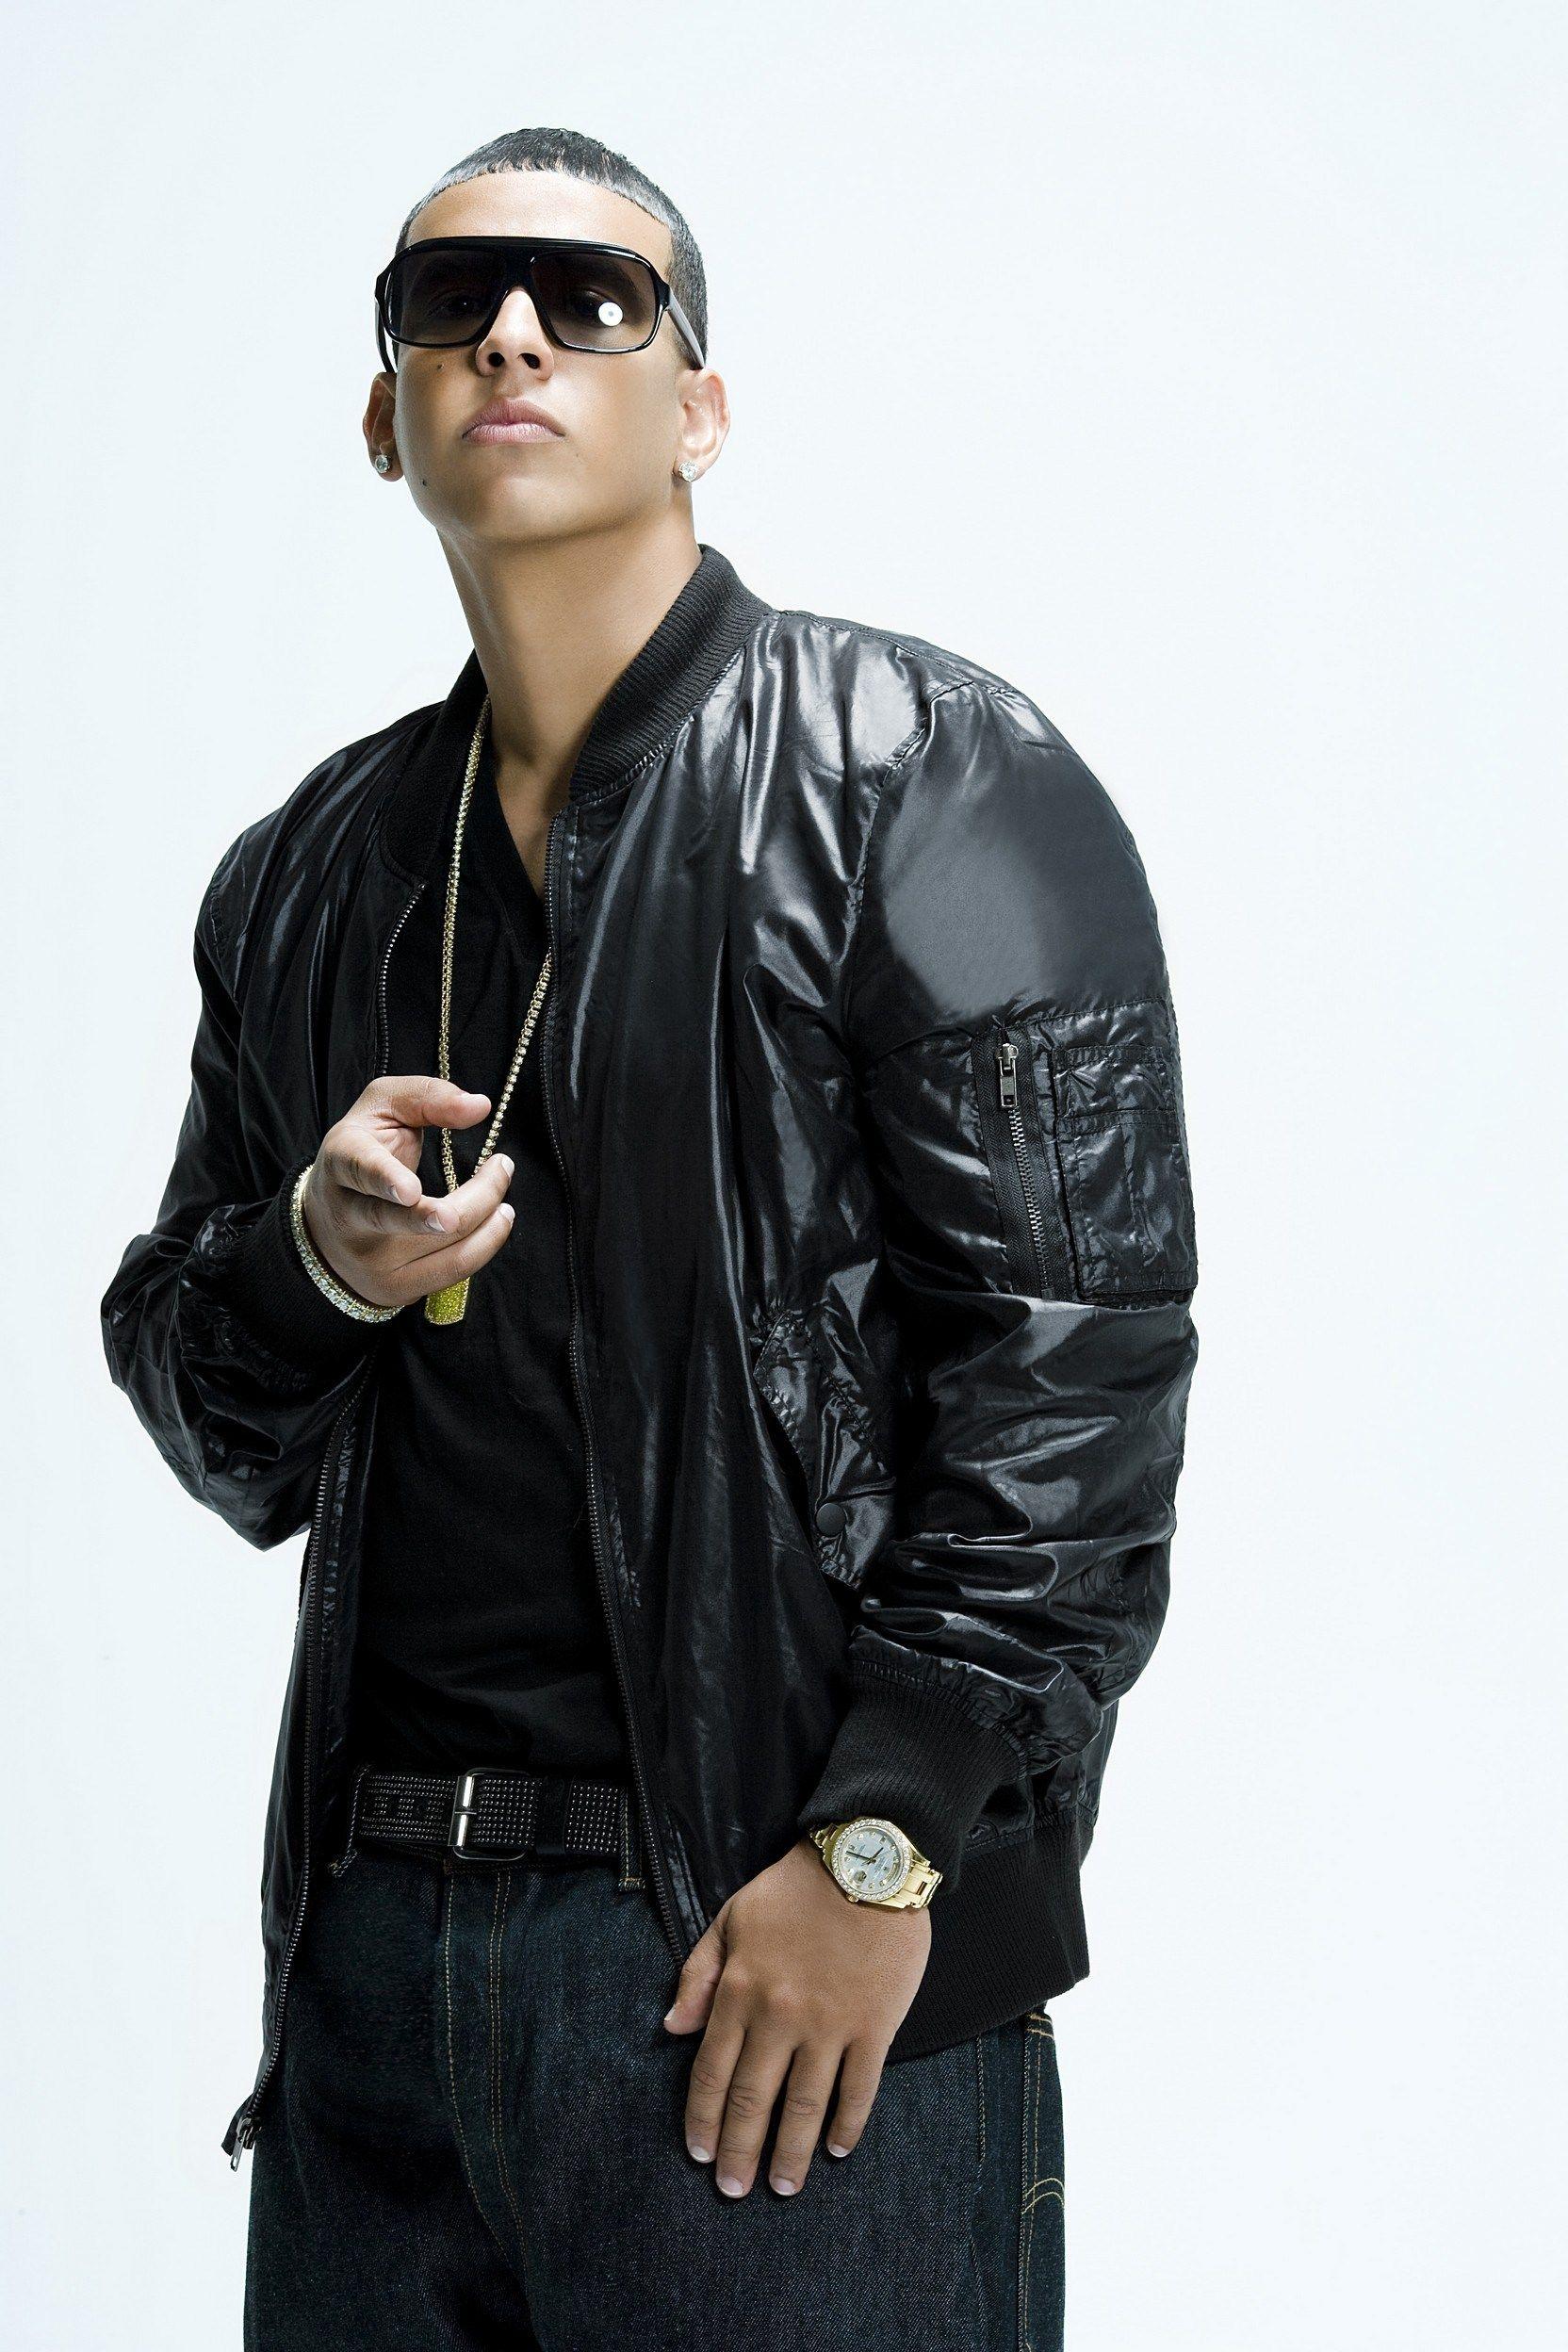 Daddy Yankee. Known people people news and biographies